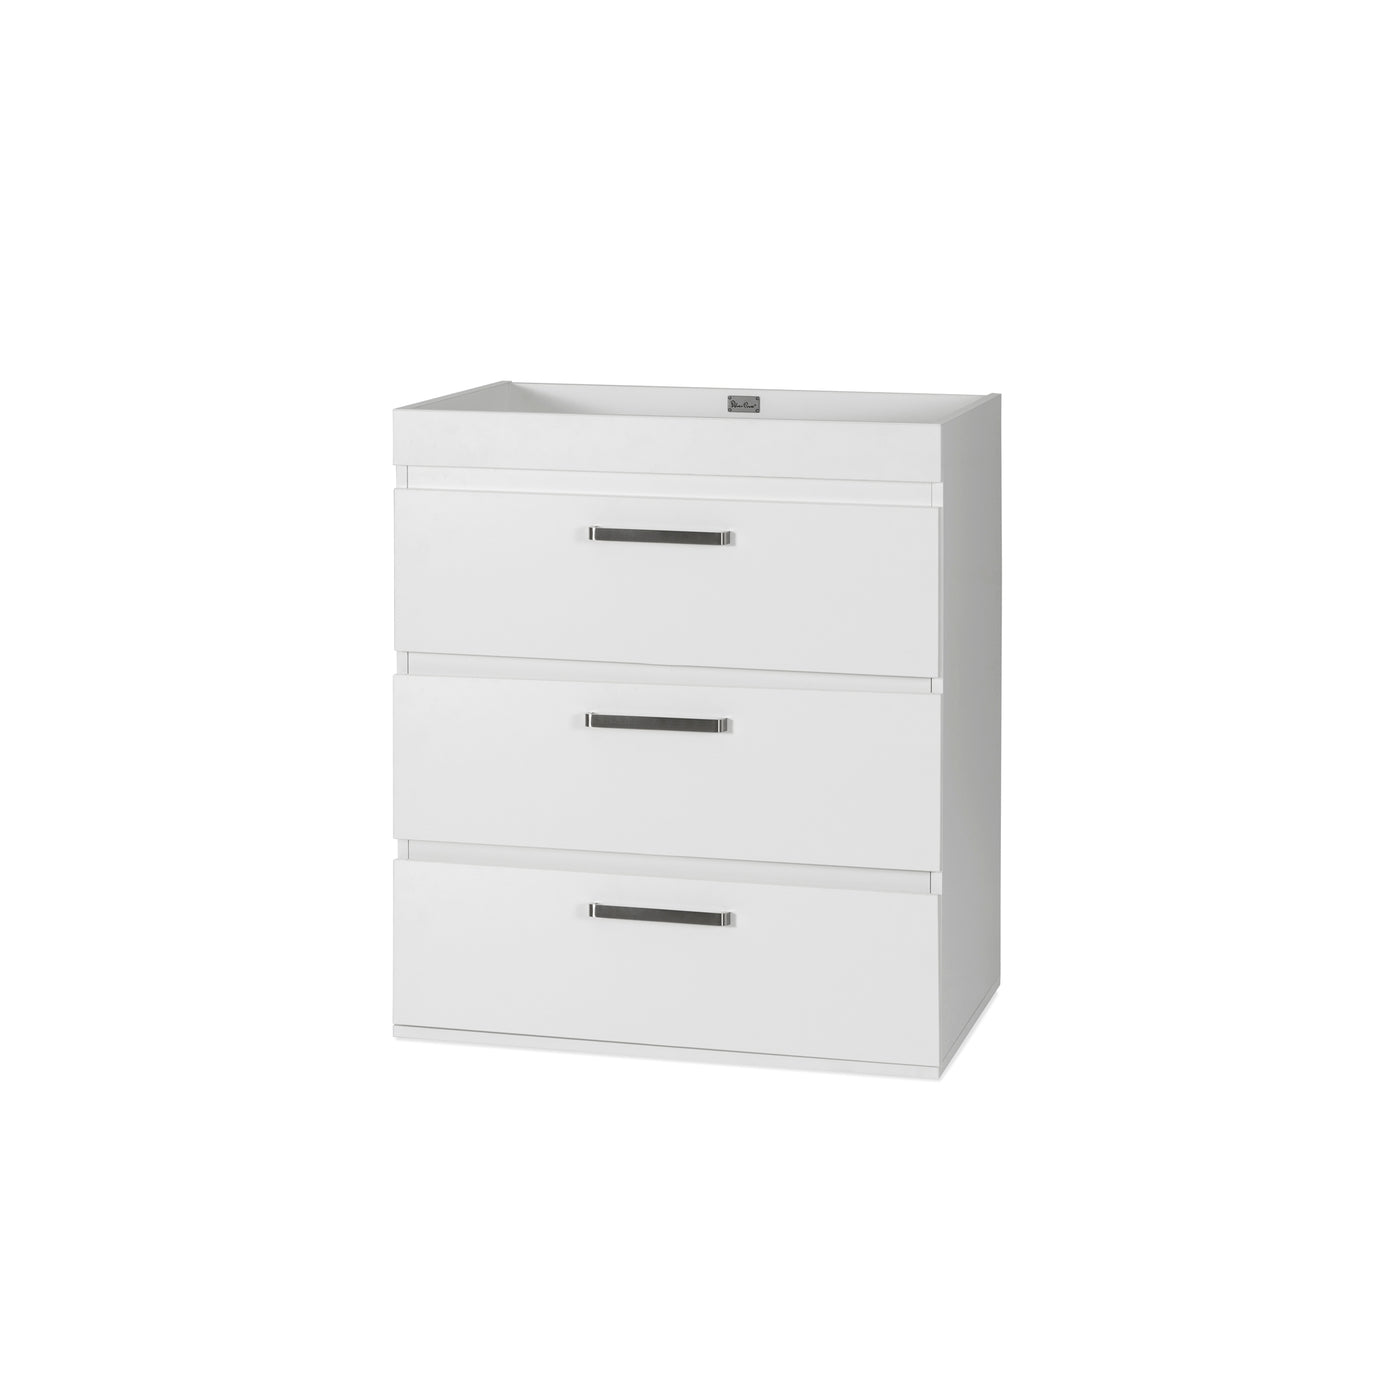 Silver Cross Cot Bed and Dresser - Finchley White